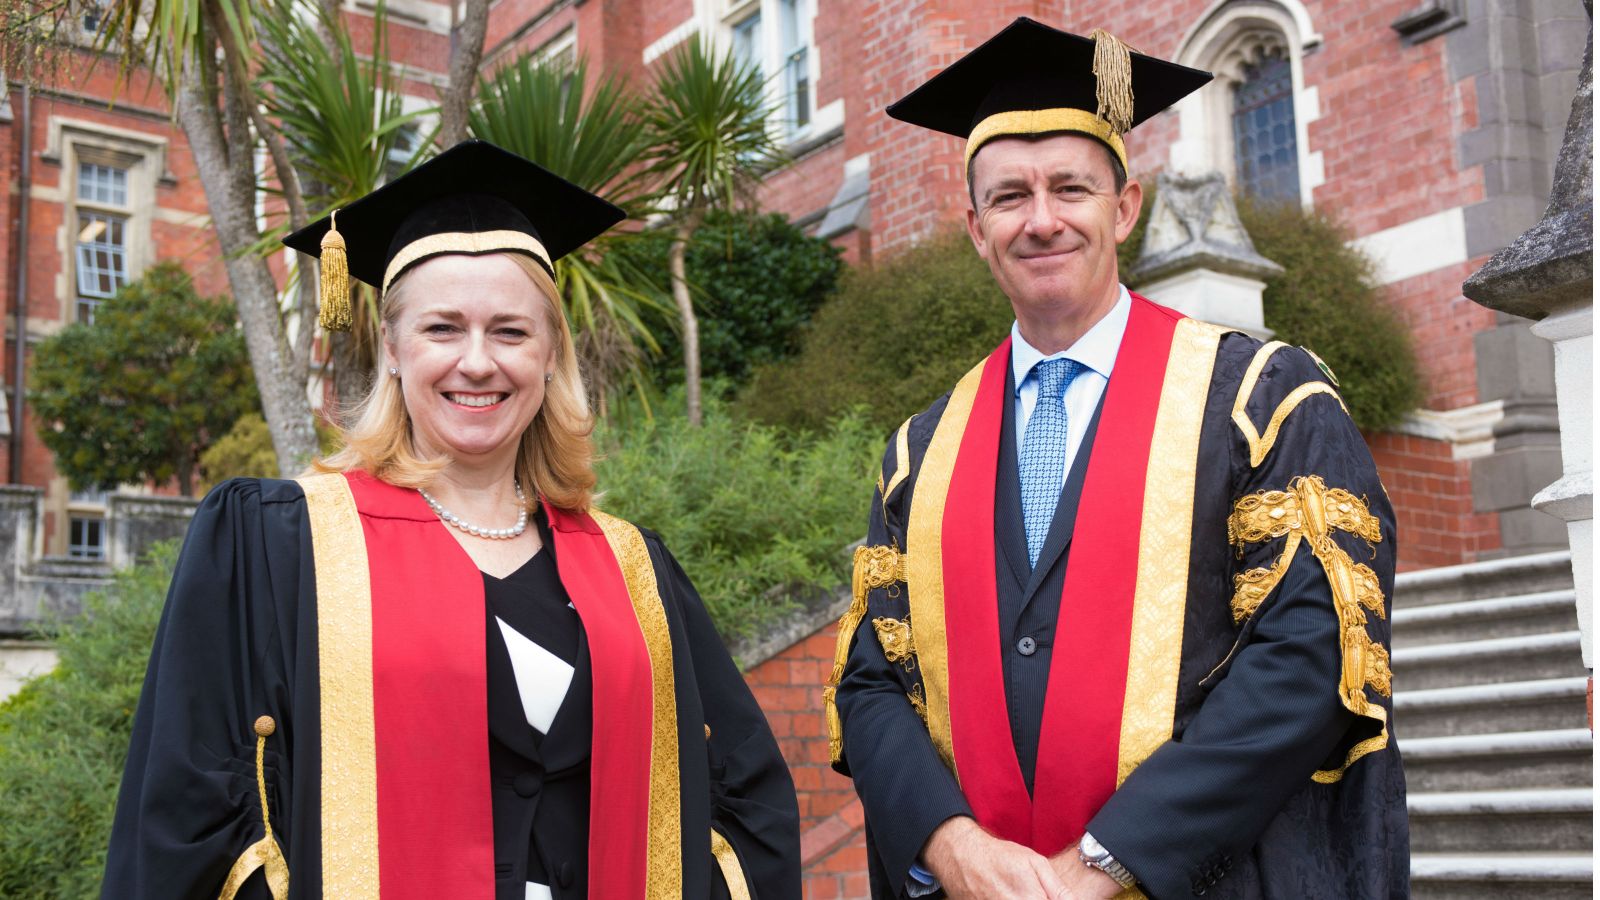 Chancellor Neil Paviour-Smith and Pro-Chancellor Dame Therese Walsh posing in academic dress before the Hunter building